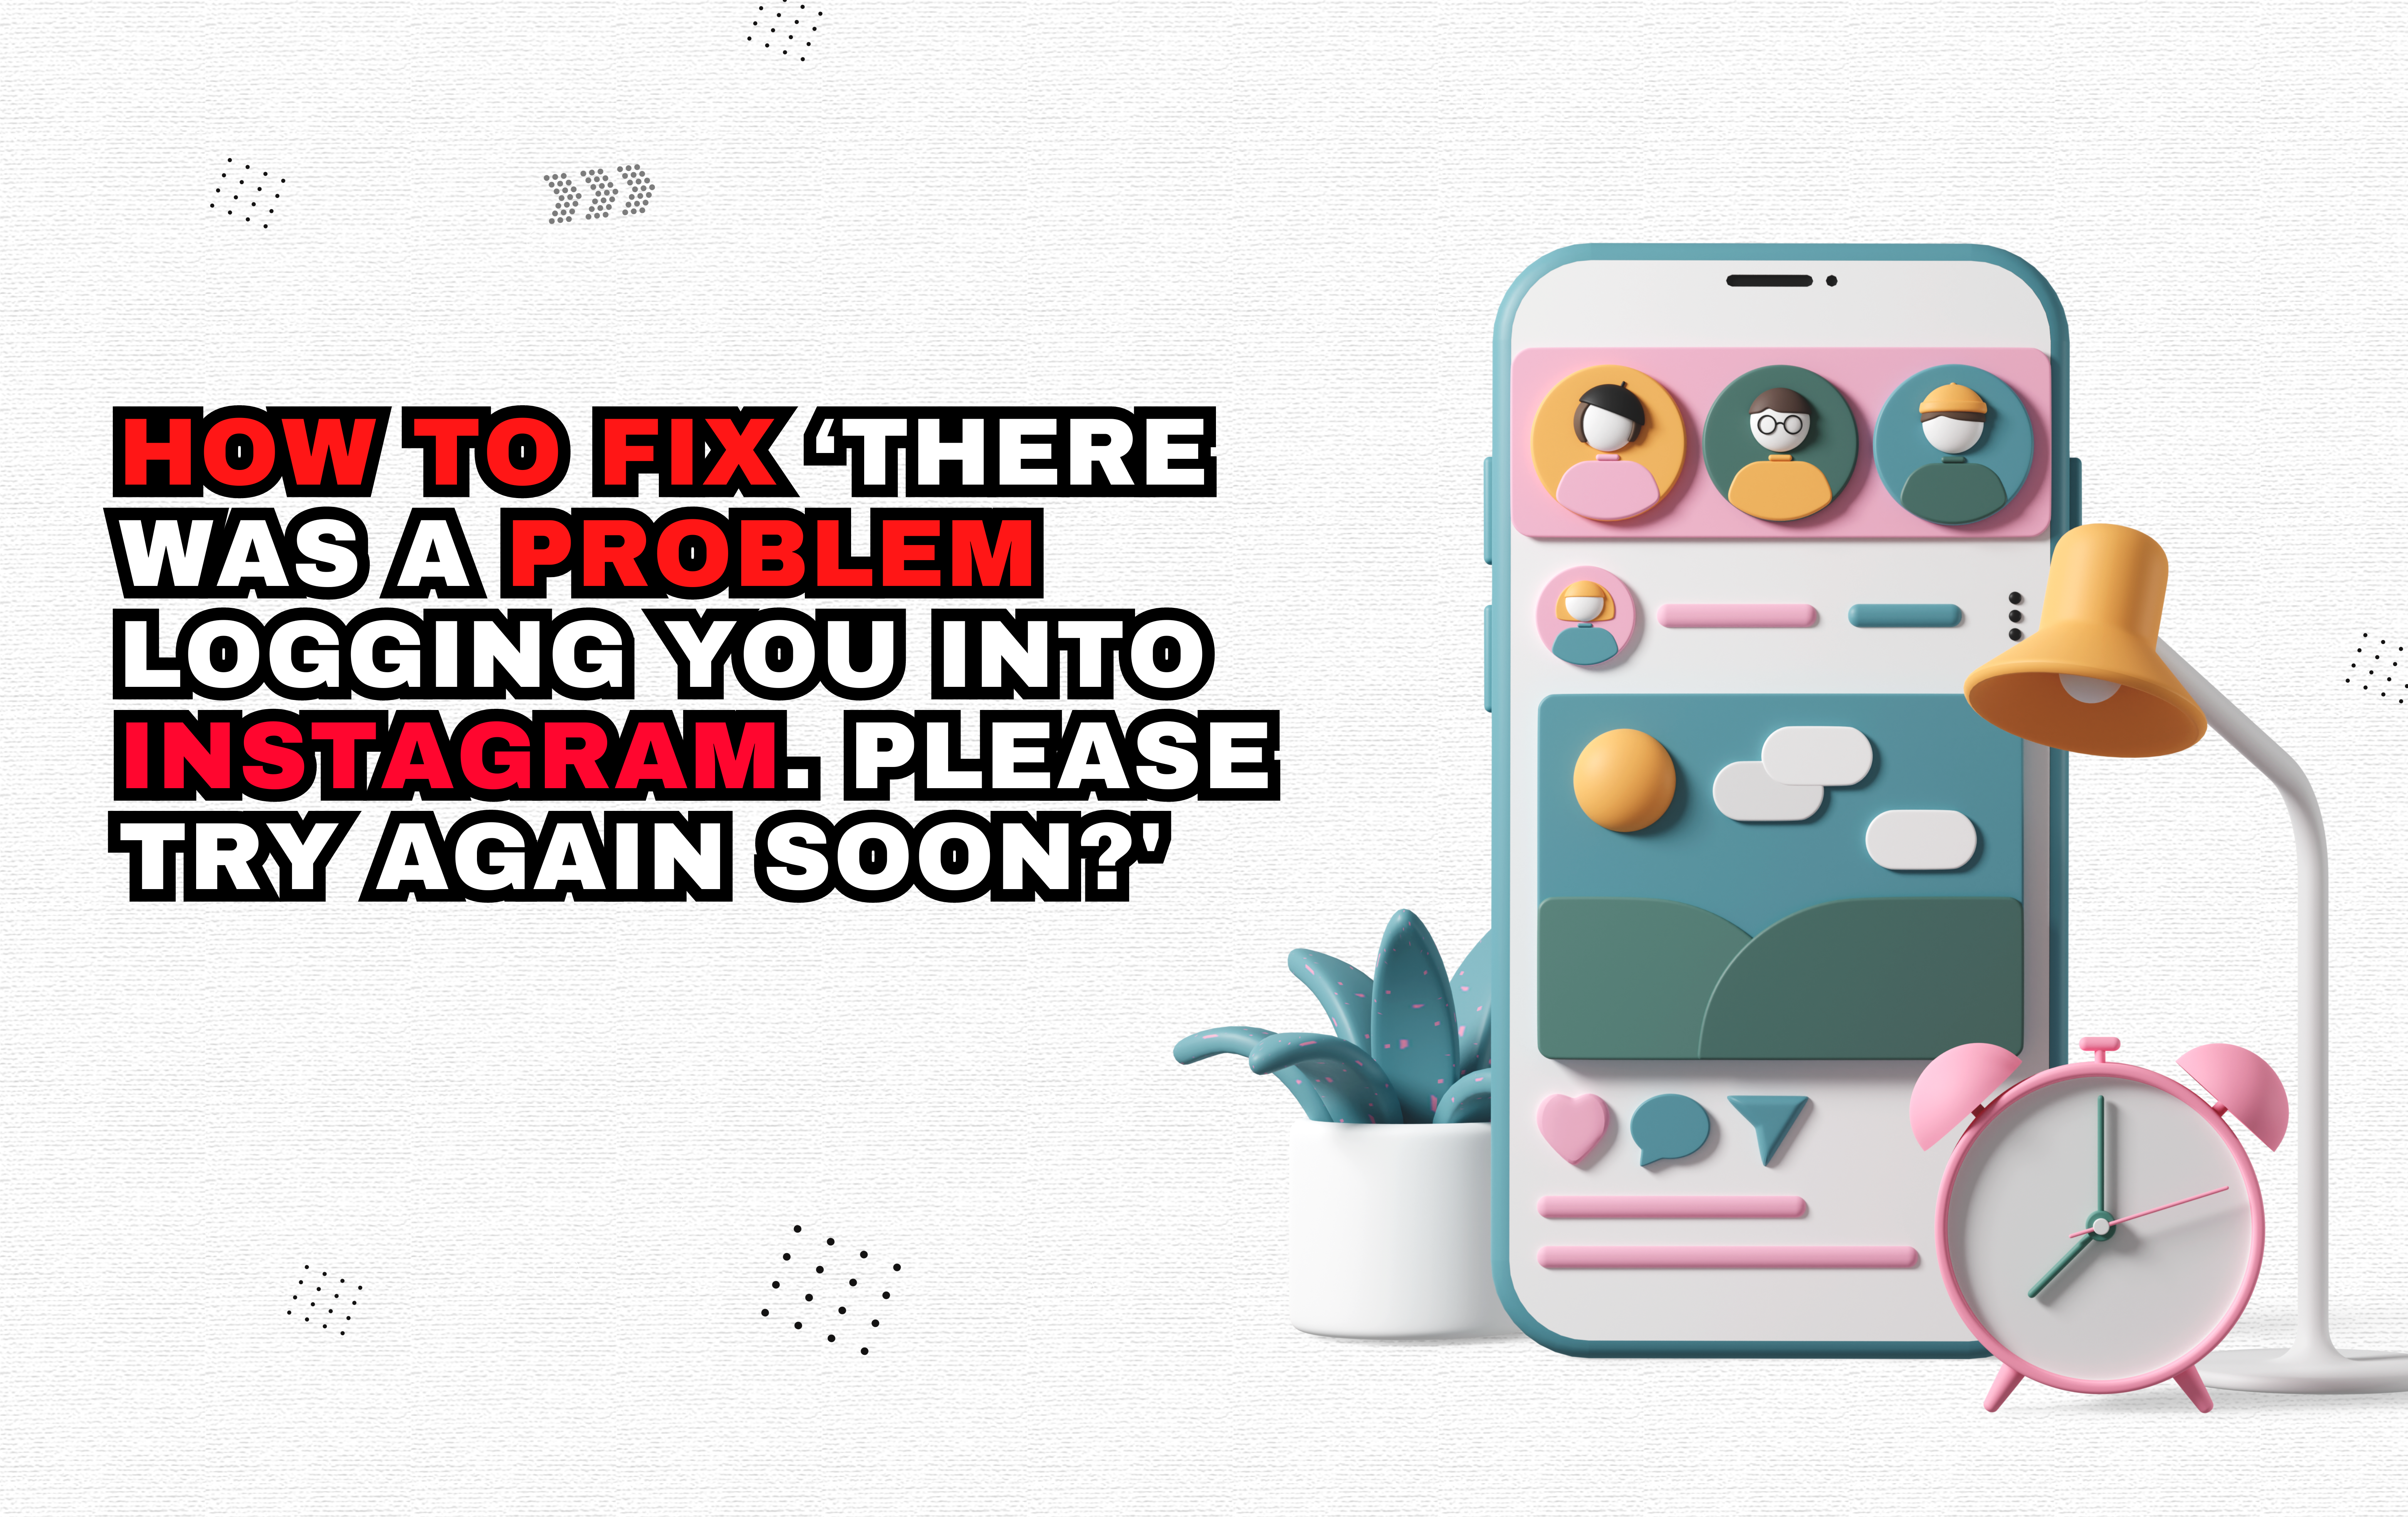 How to Fix 'There Was a Problem Logging You into Instagram. Please Try Again Soon?'